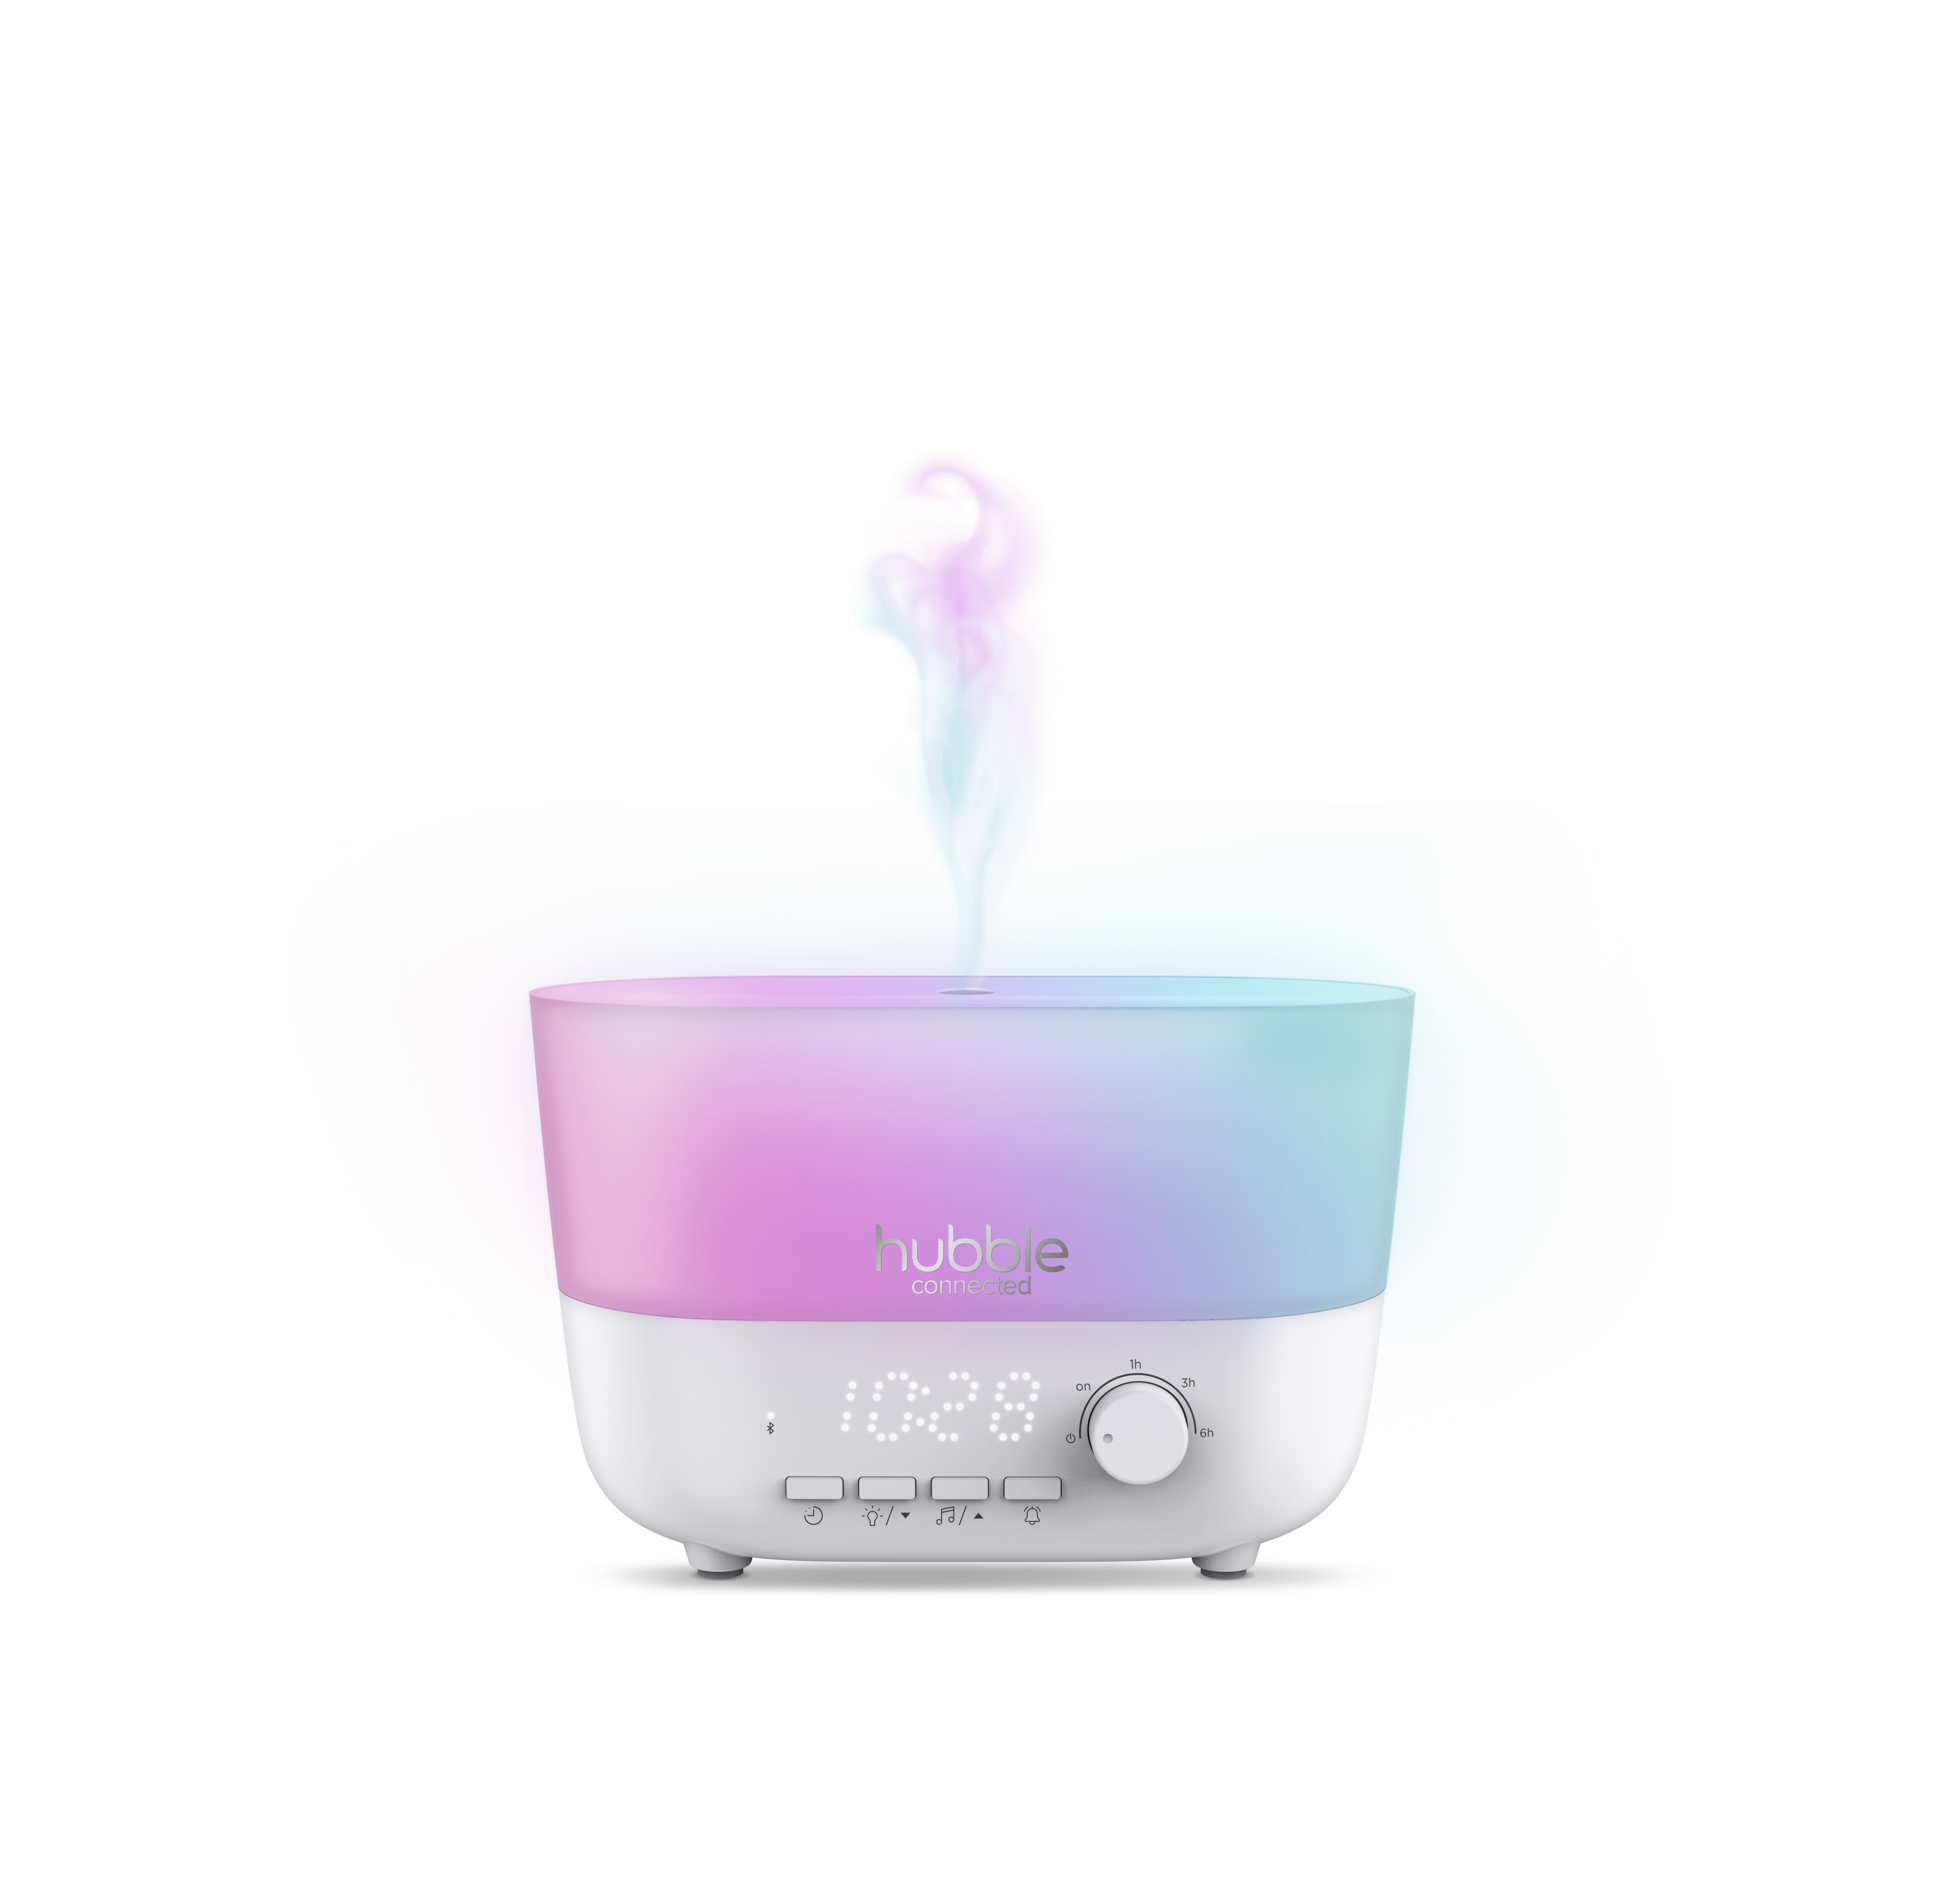 Hubble Connected Hubble 5-in-1 Humidifier with Aroma Diffuser, Speaker, Night Light, and Clock